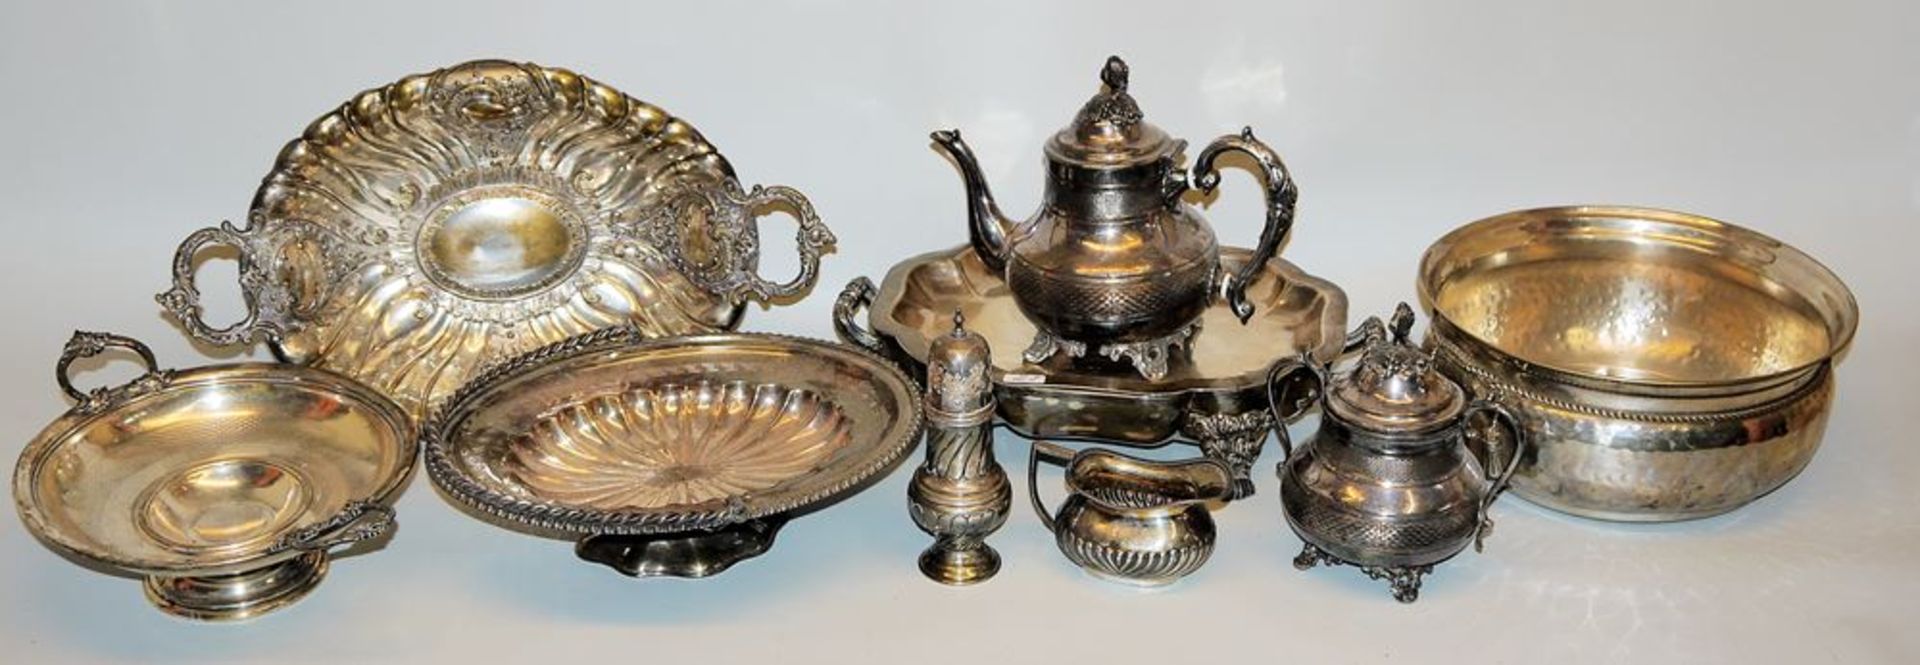 Eight pieces of 19th c. silverplate